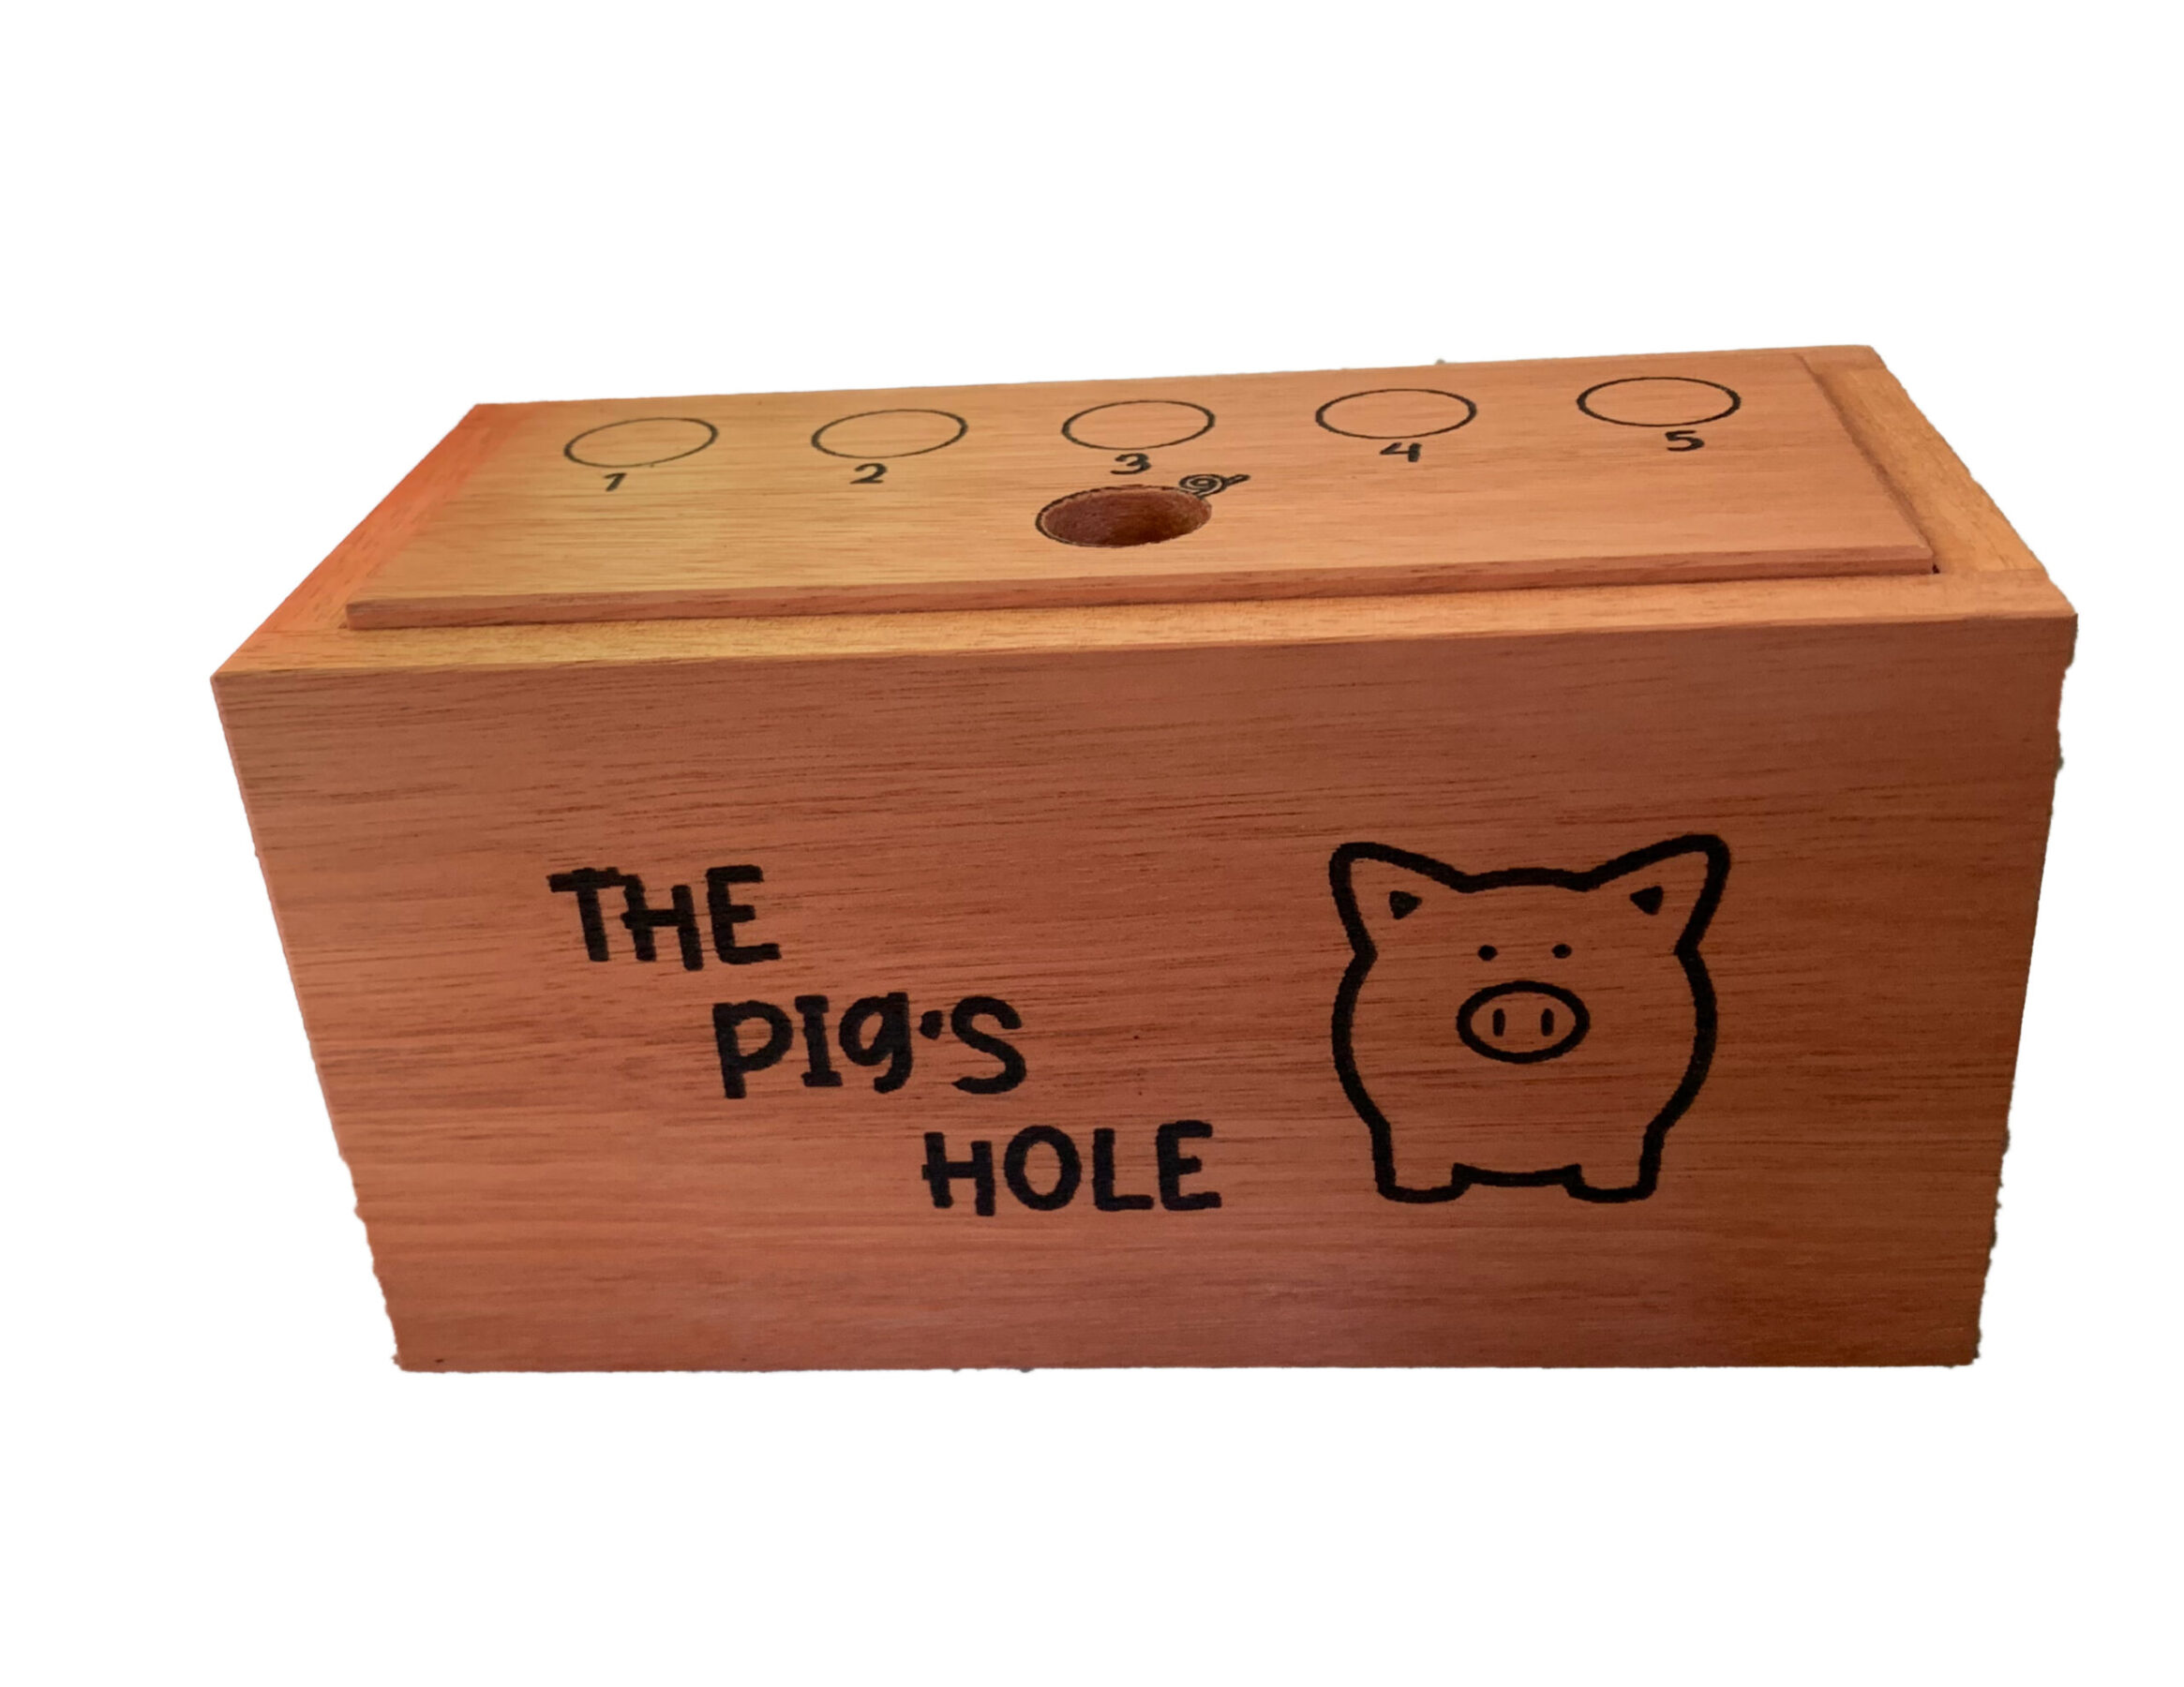 The pig’s hole